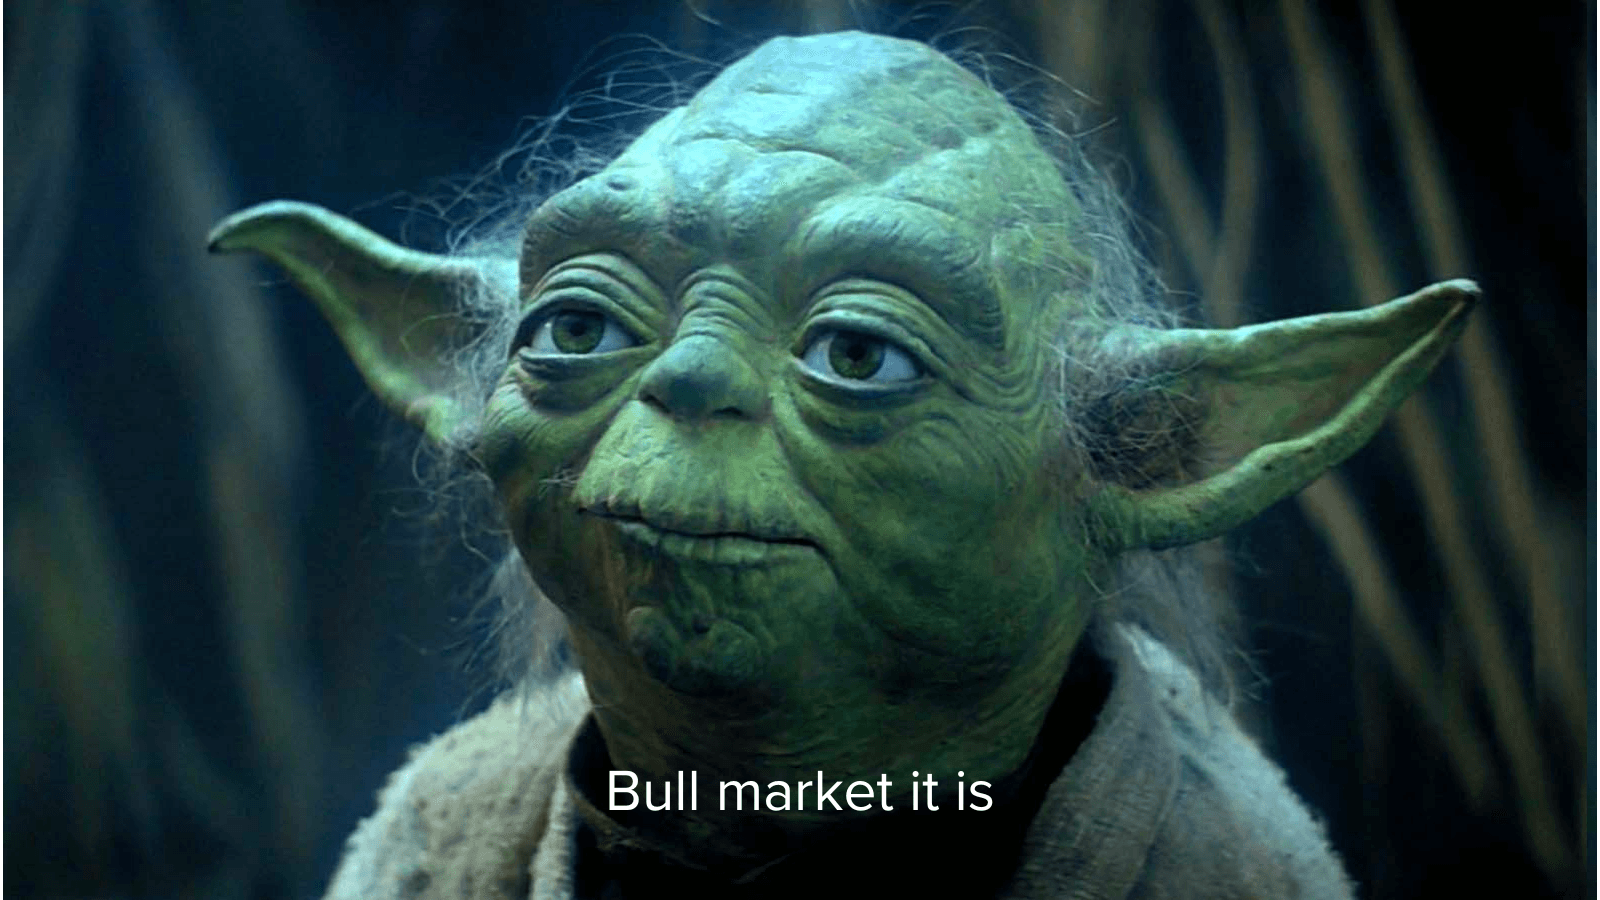 A new bull market in the making